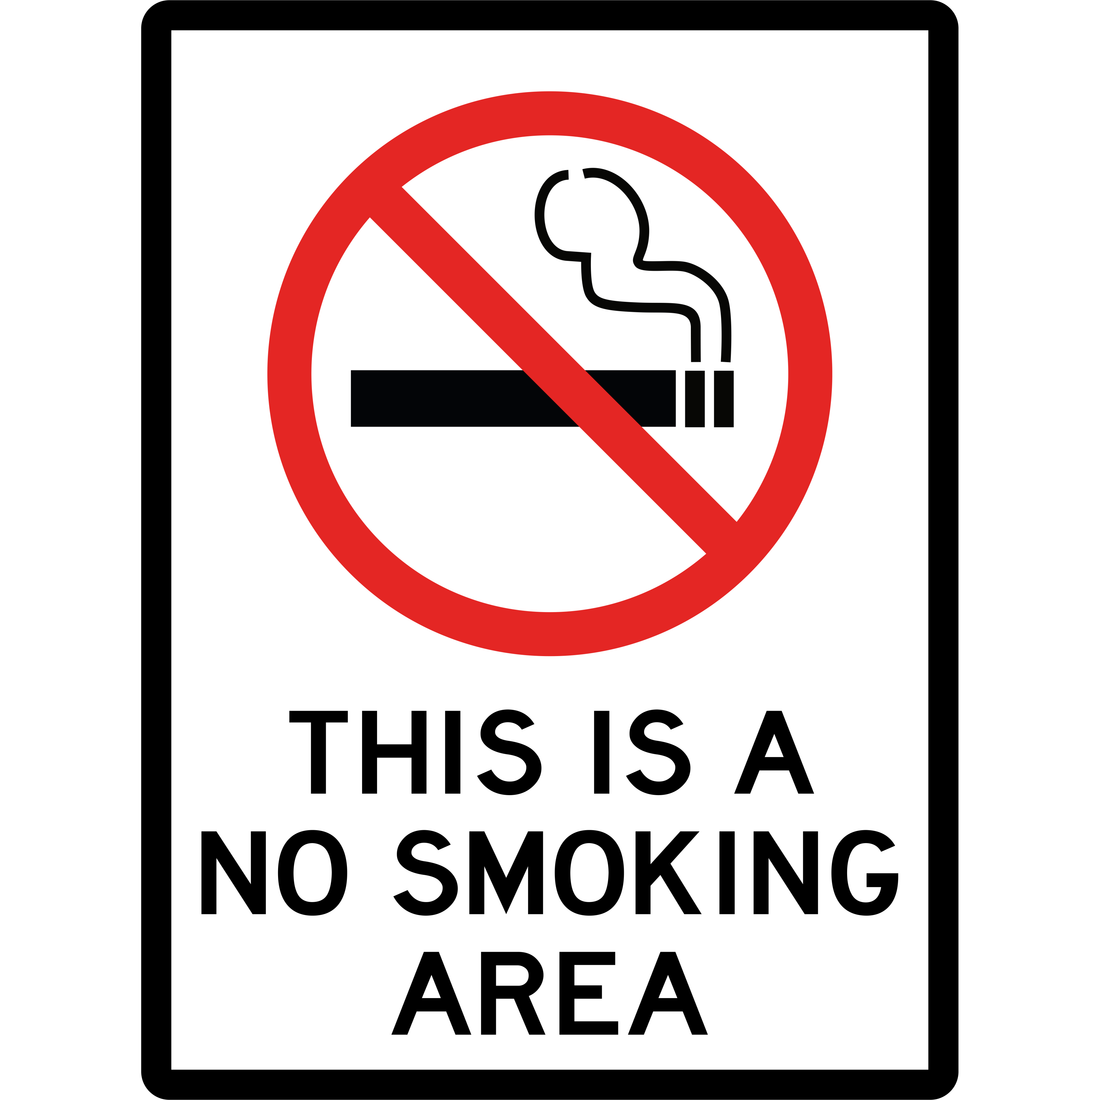 PROHIBITION - THIS IS A NO SMOKING AREA